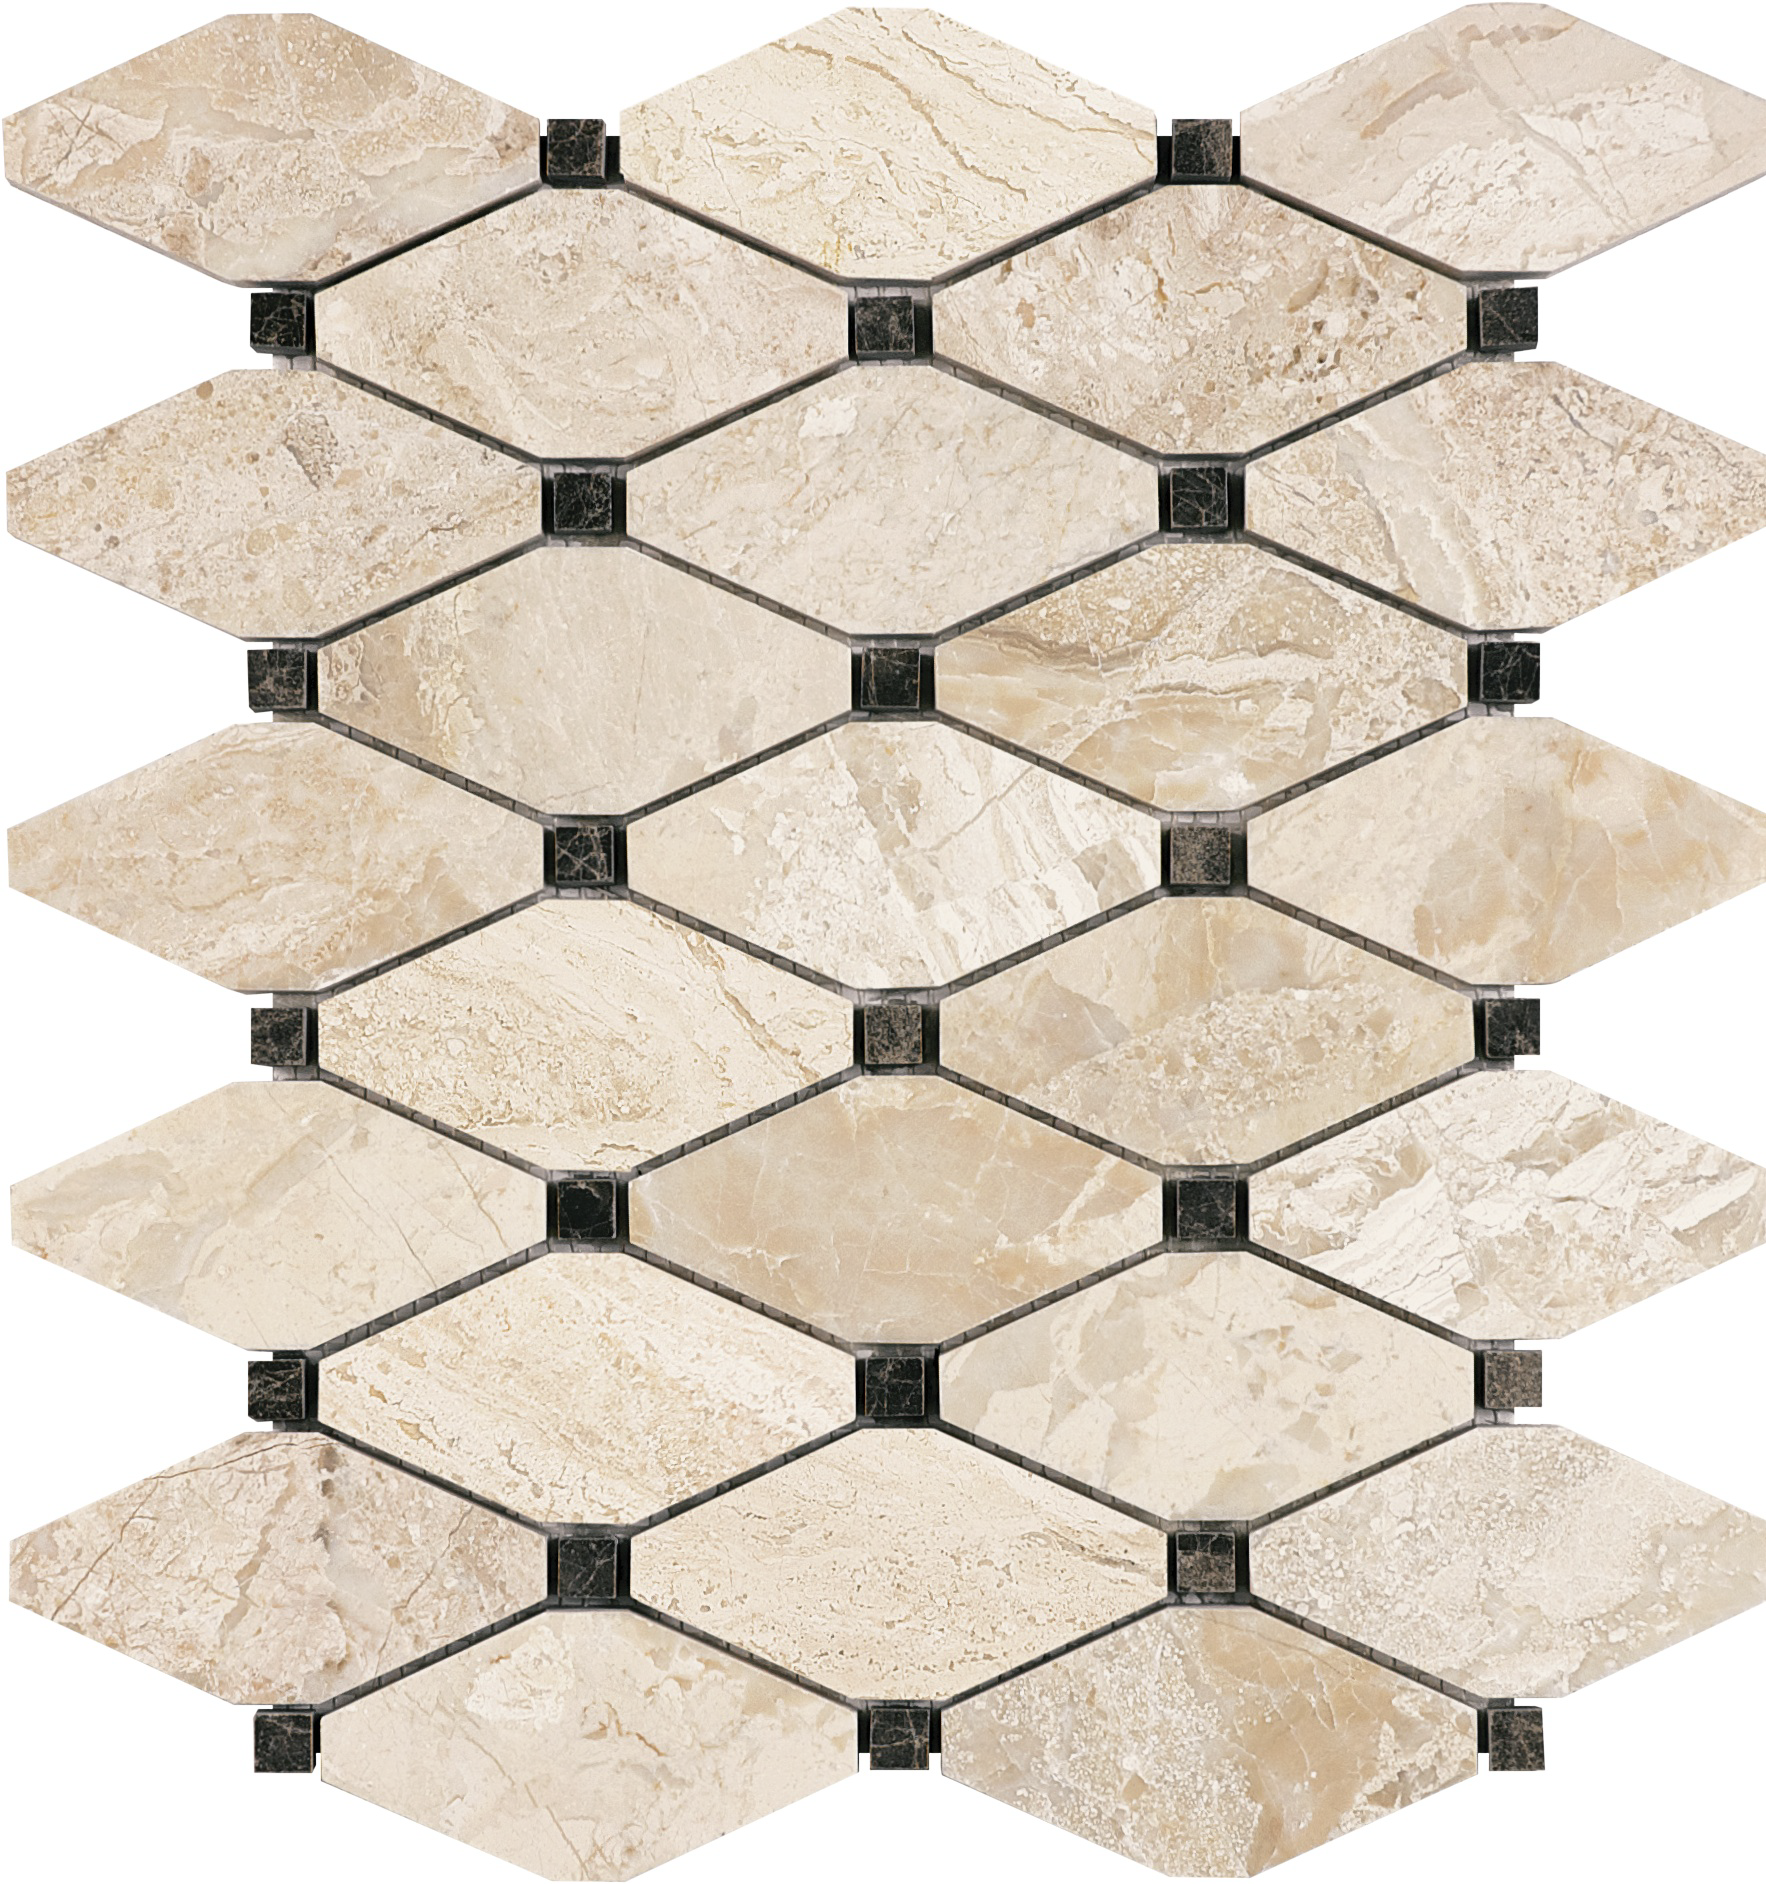 marble clipped diamond pattern natural stone mosaic from impero reale anatolia collection distributed by surface group international honed finish straight edge edge mesh shape